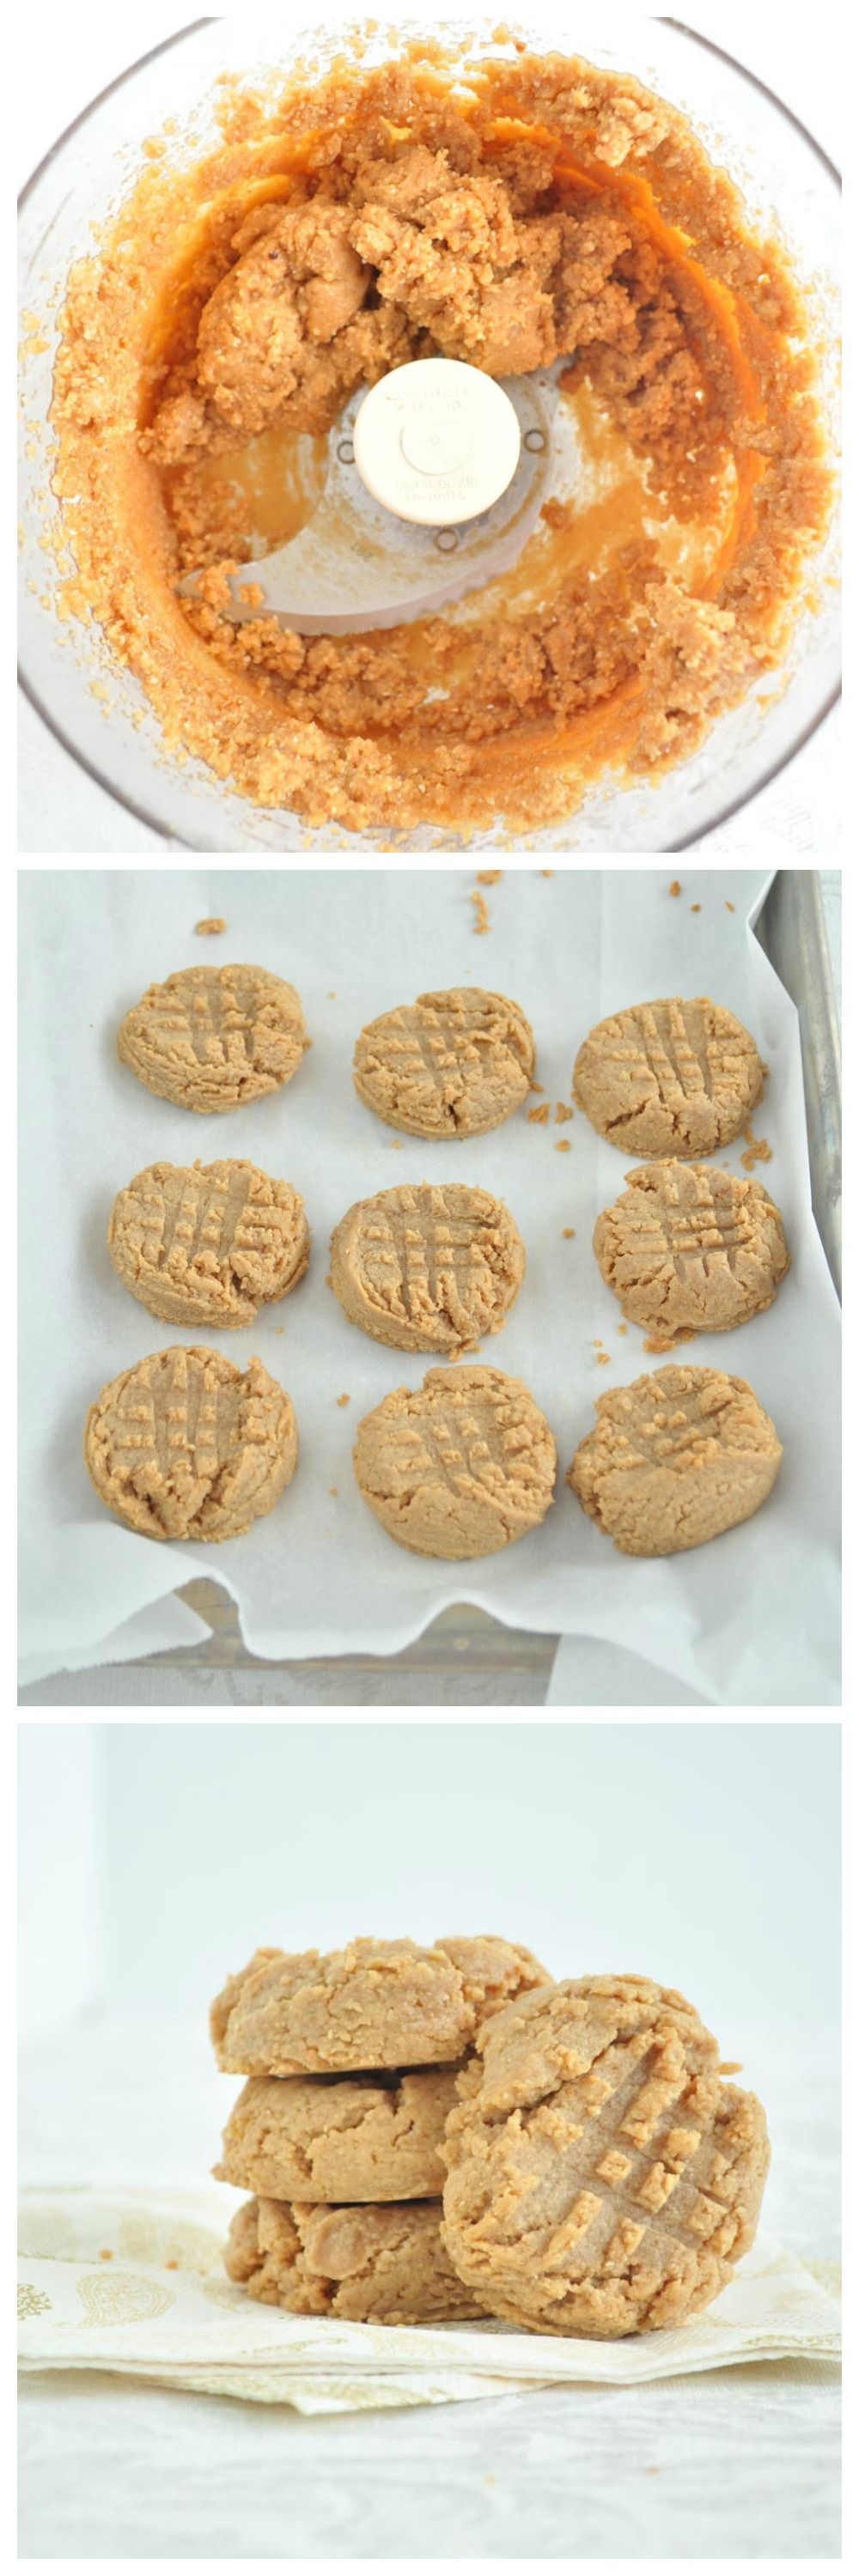 3 Ingredient Peanut Butter Cookies are healthy, delicious and easy!